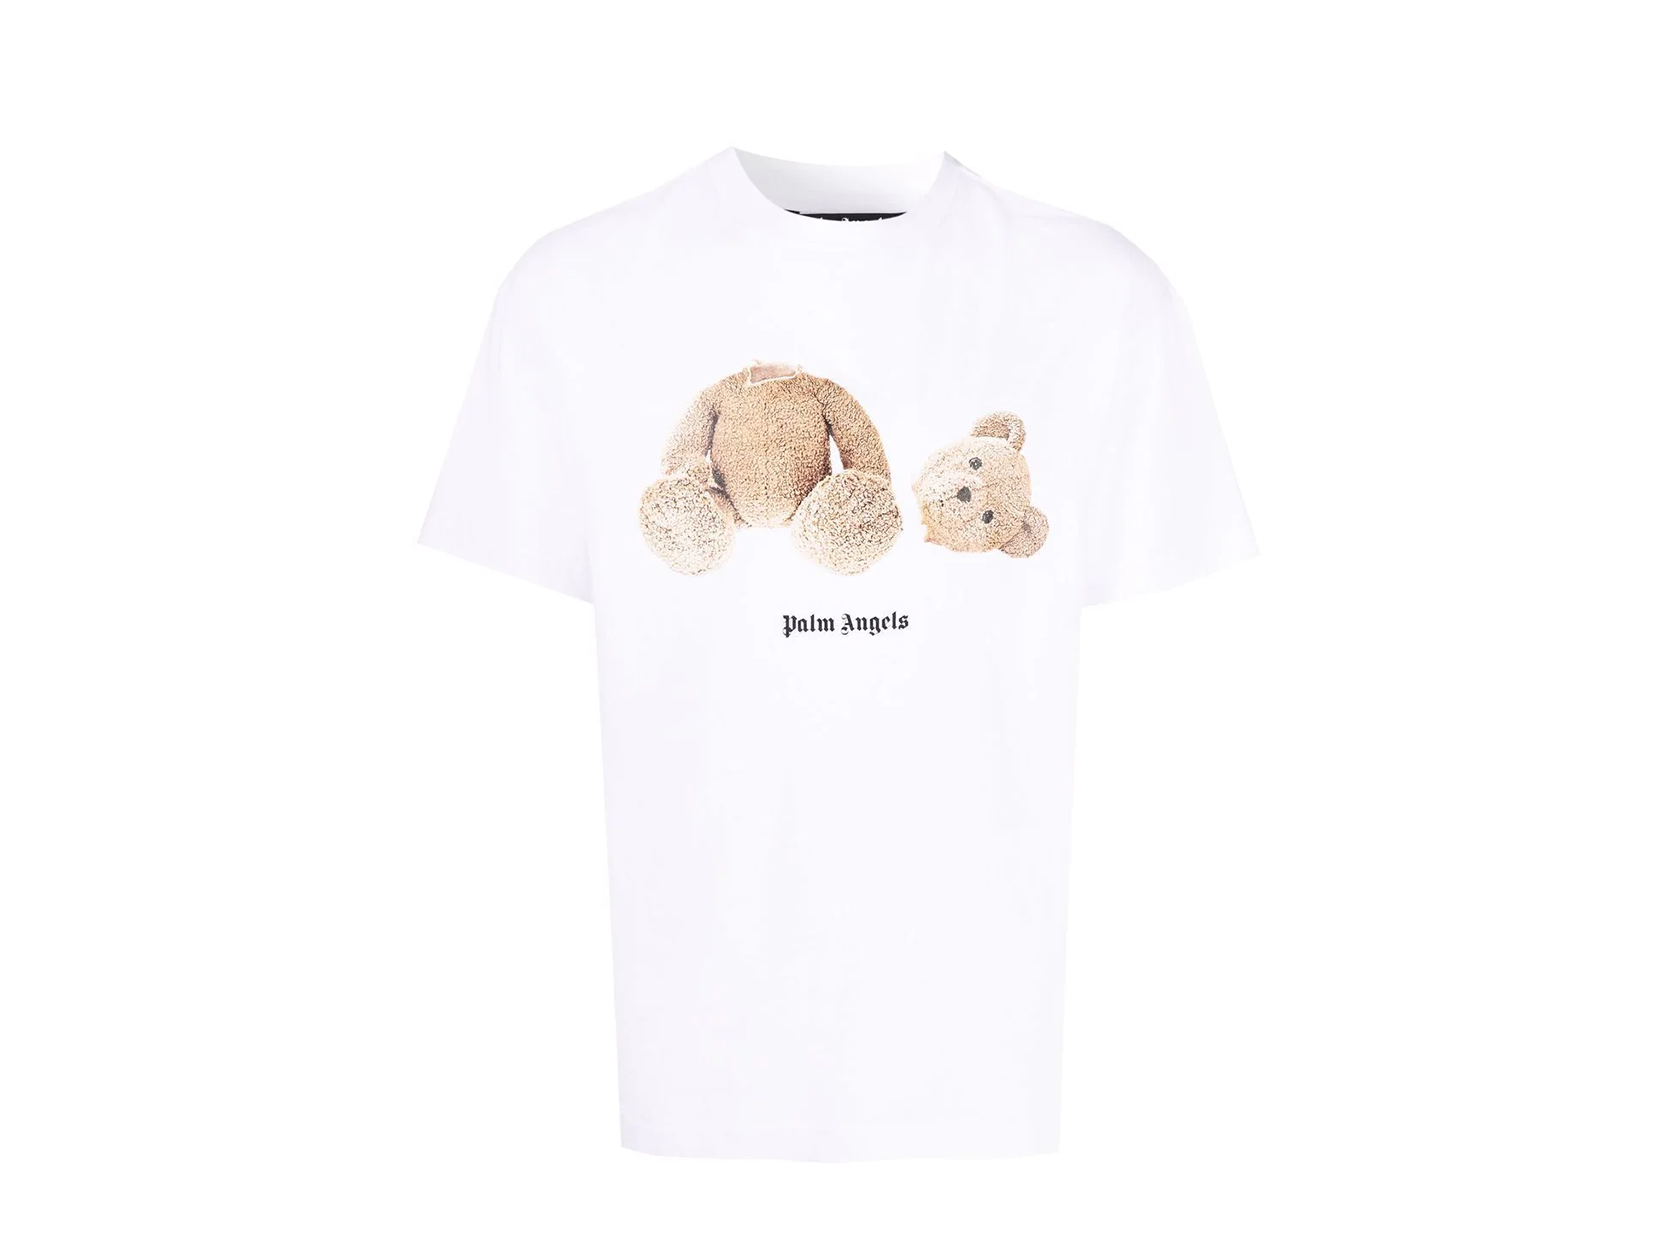 Double Boxed hoodie 244.99 Palm Angels Teddy Kill The Bear White T Shirt Double Boxed